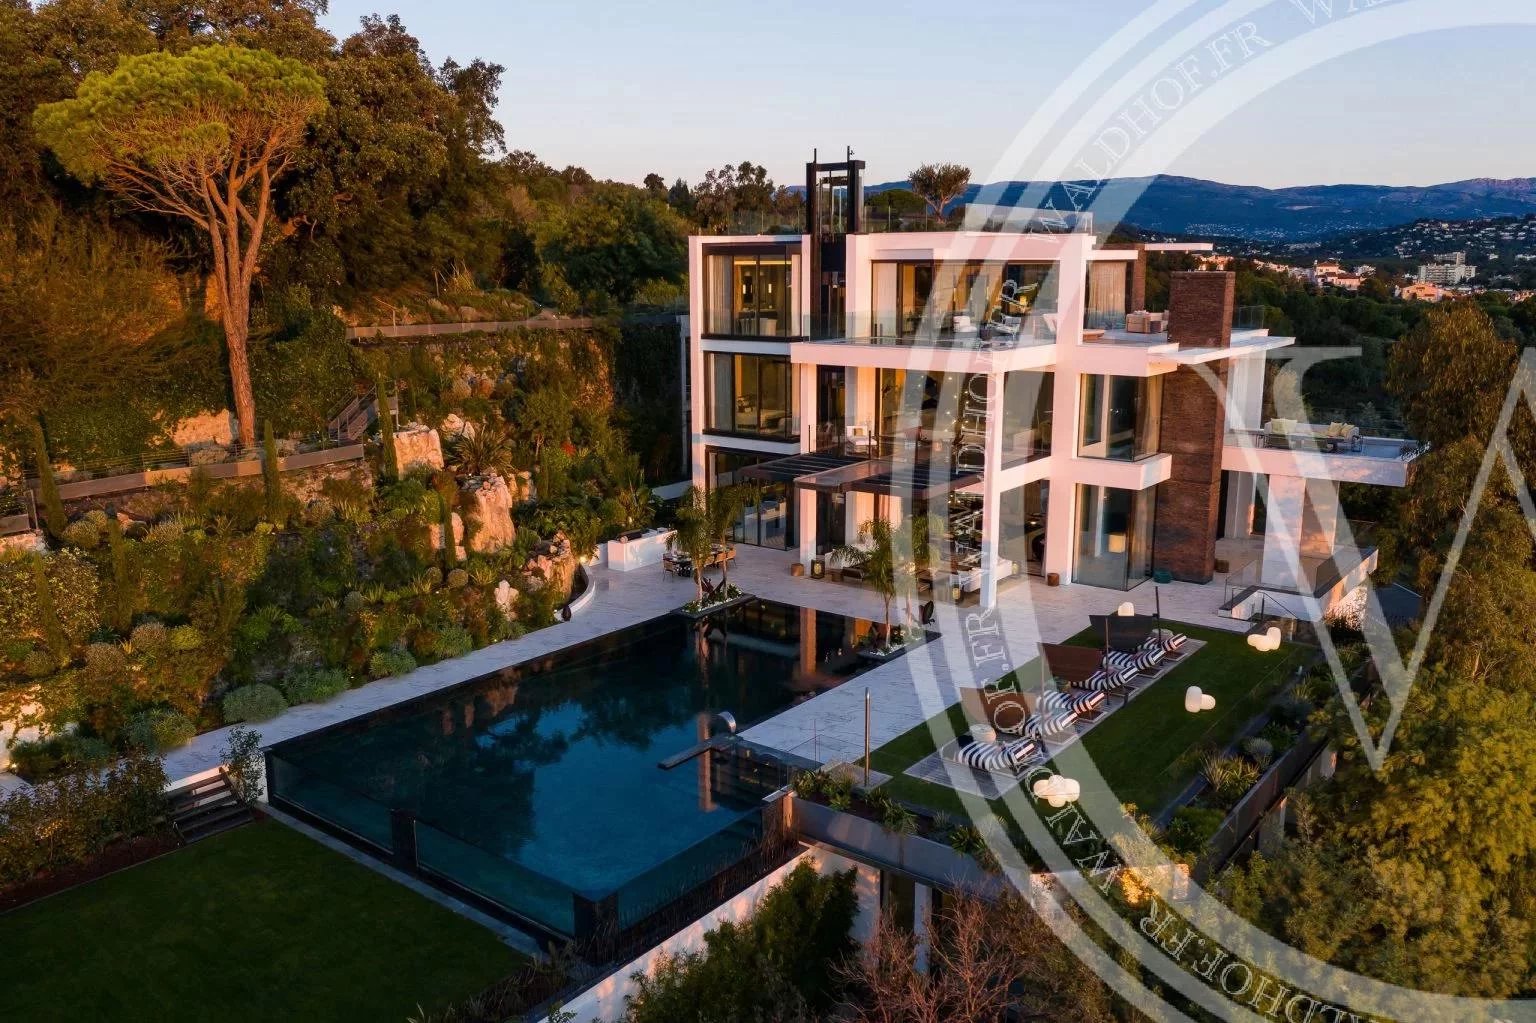 Brand new Luxurious Mega Mansion in the hills of Cannes